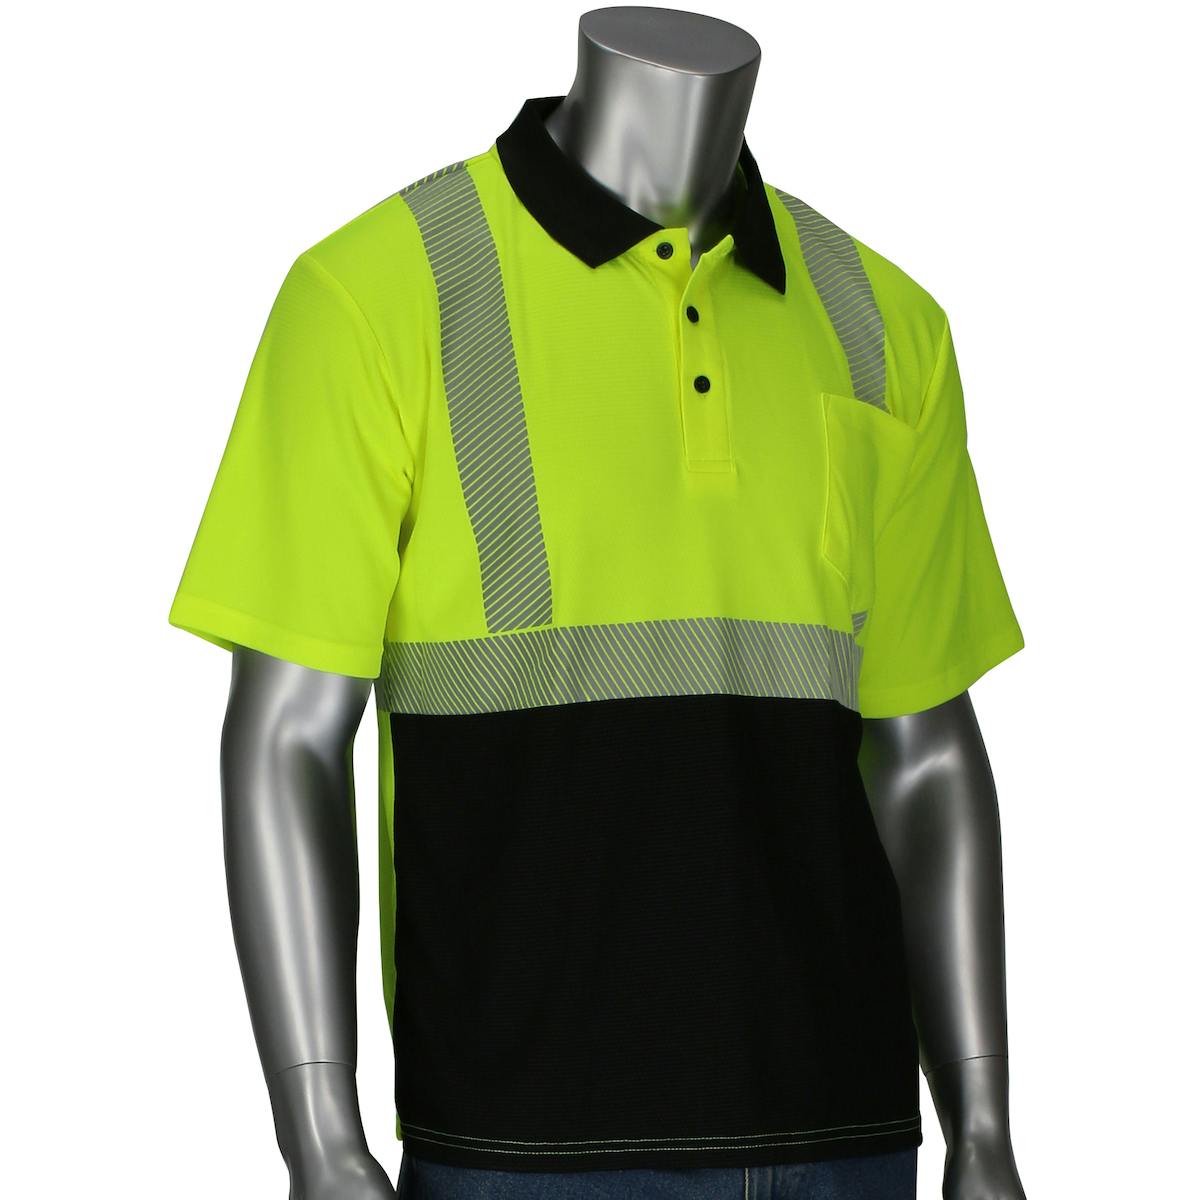 ANSI Type R Class 2 Polo Shirt with Performance Moisture Control Fabric and Black Bottom Front, Hi-Vis Yellow (312-1610B)_1